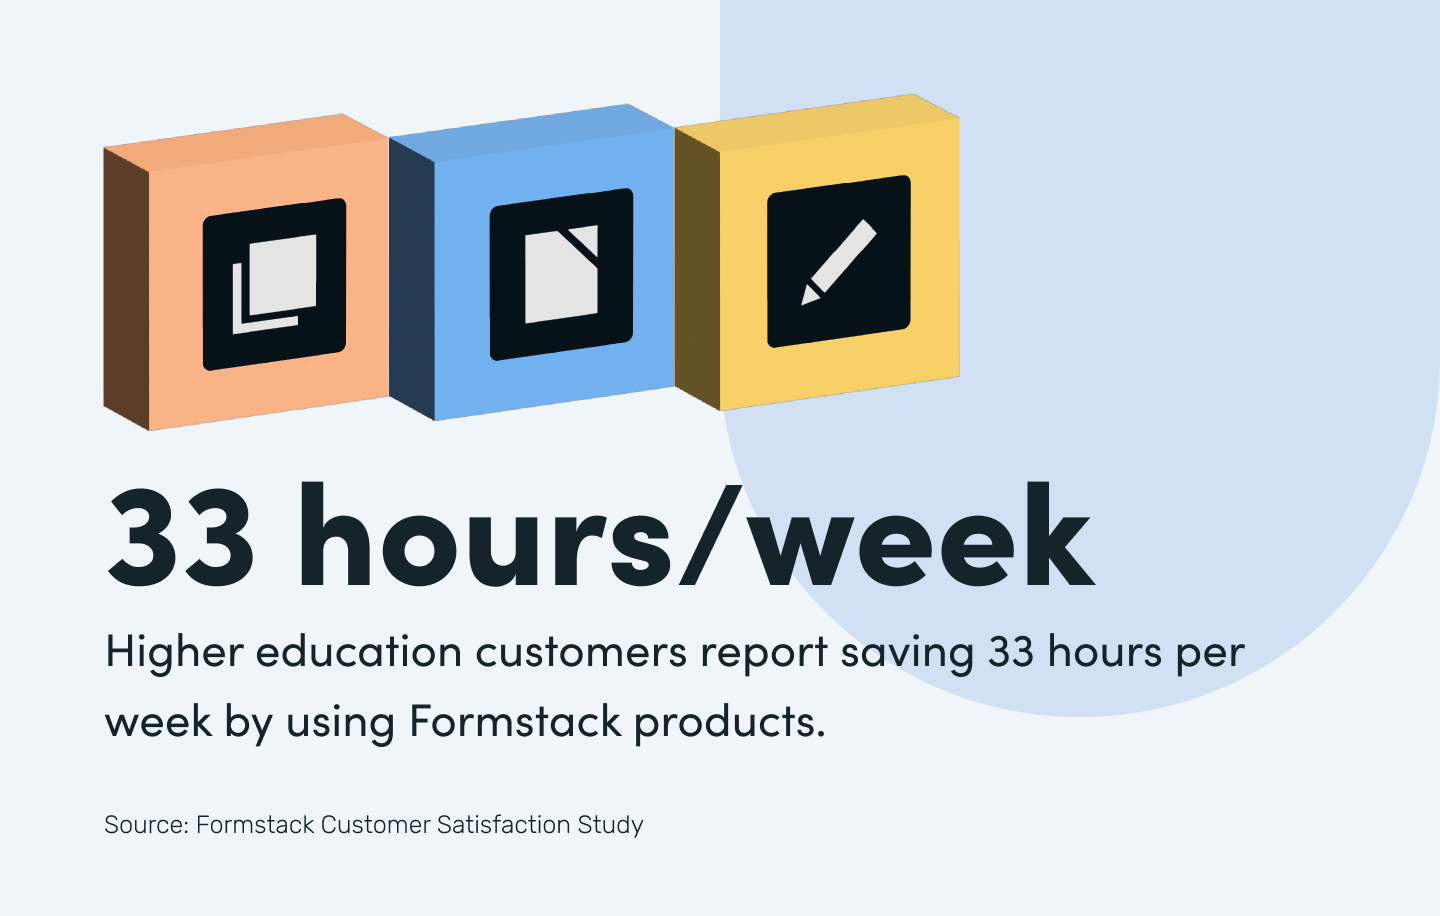 Formstack customers in higher education save 33 hours per week 